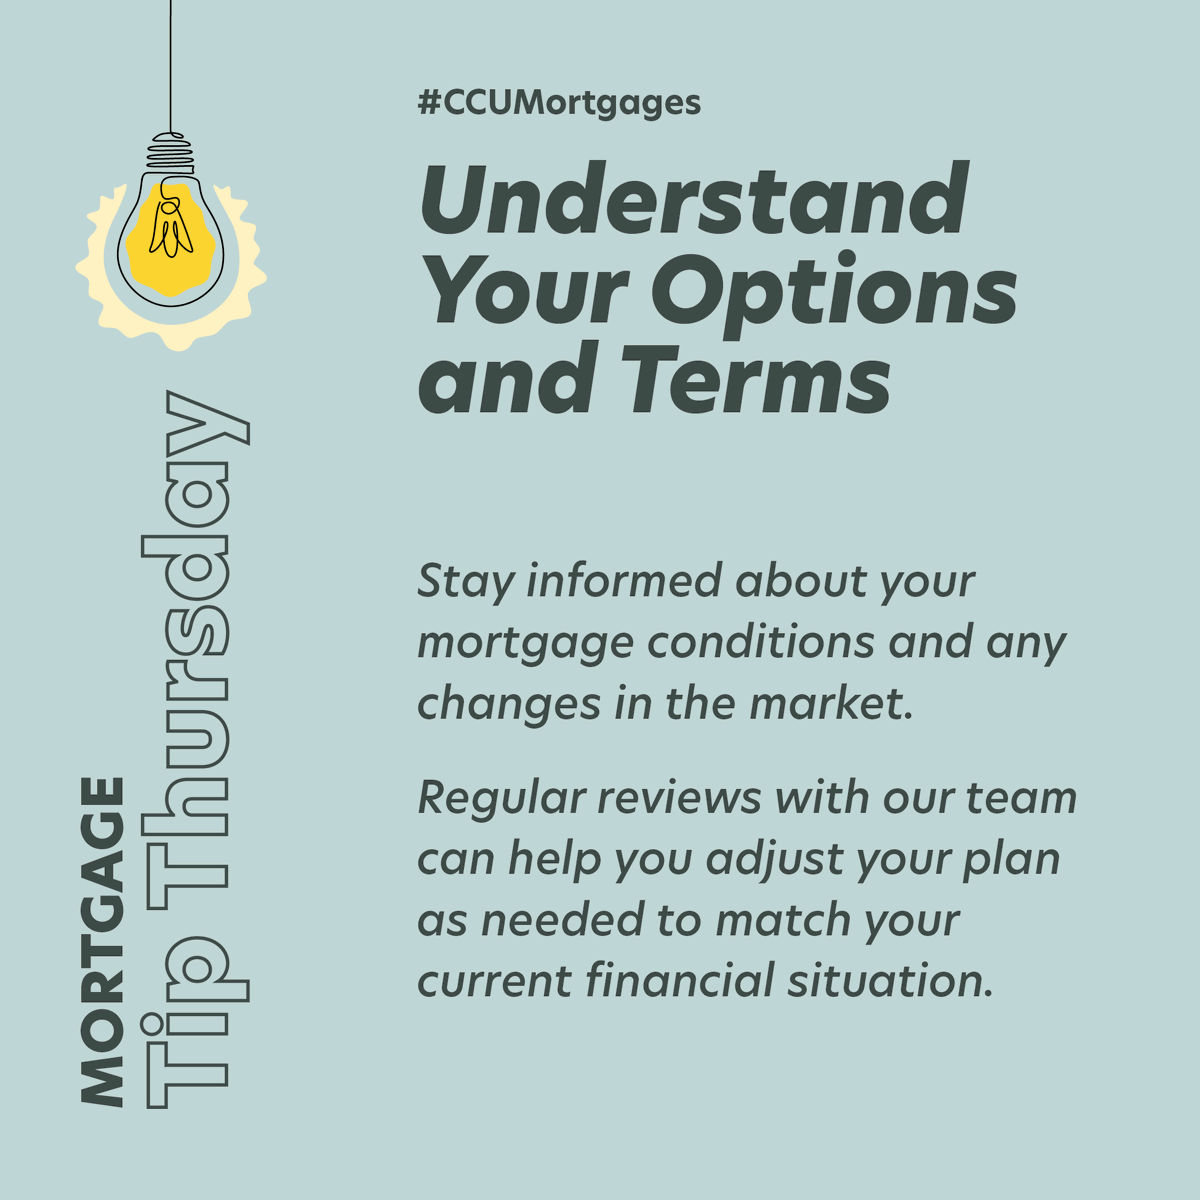 Keep up-to-date with your mortgage and market changes. Regular check-ins with our team can help adjust your plan to fit your current financial needs.
#AskAudrey #MortgageTips #CCUmortgages #FinanceTips #SaveWithCCU #Homebuyersguide #homeloansmadesimple #mortgagehelp